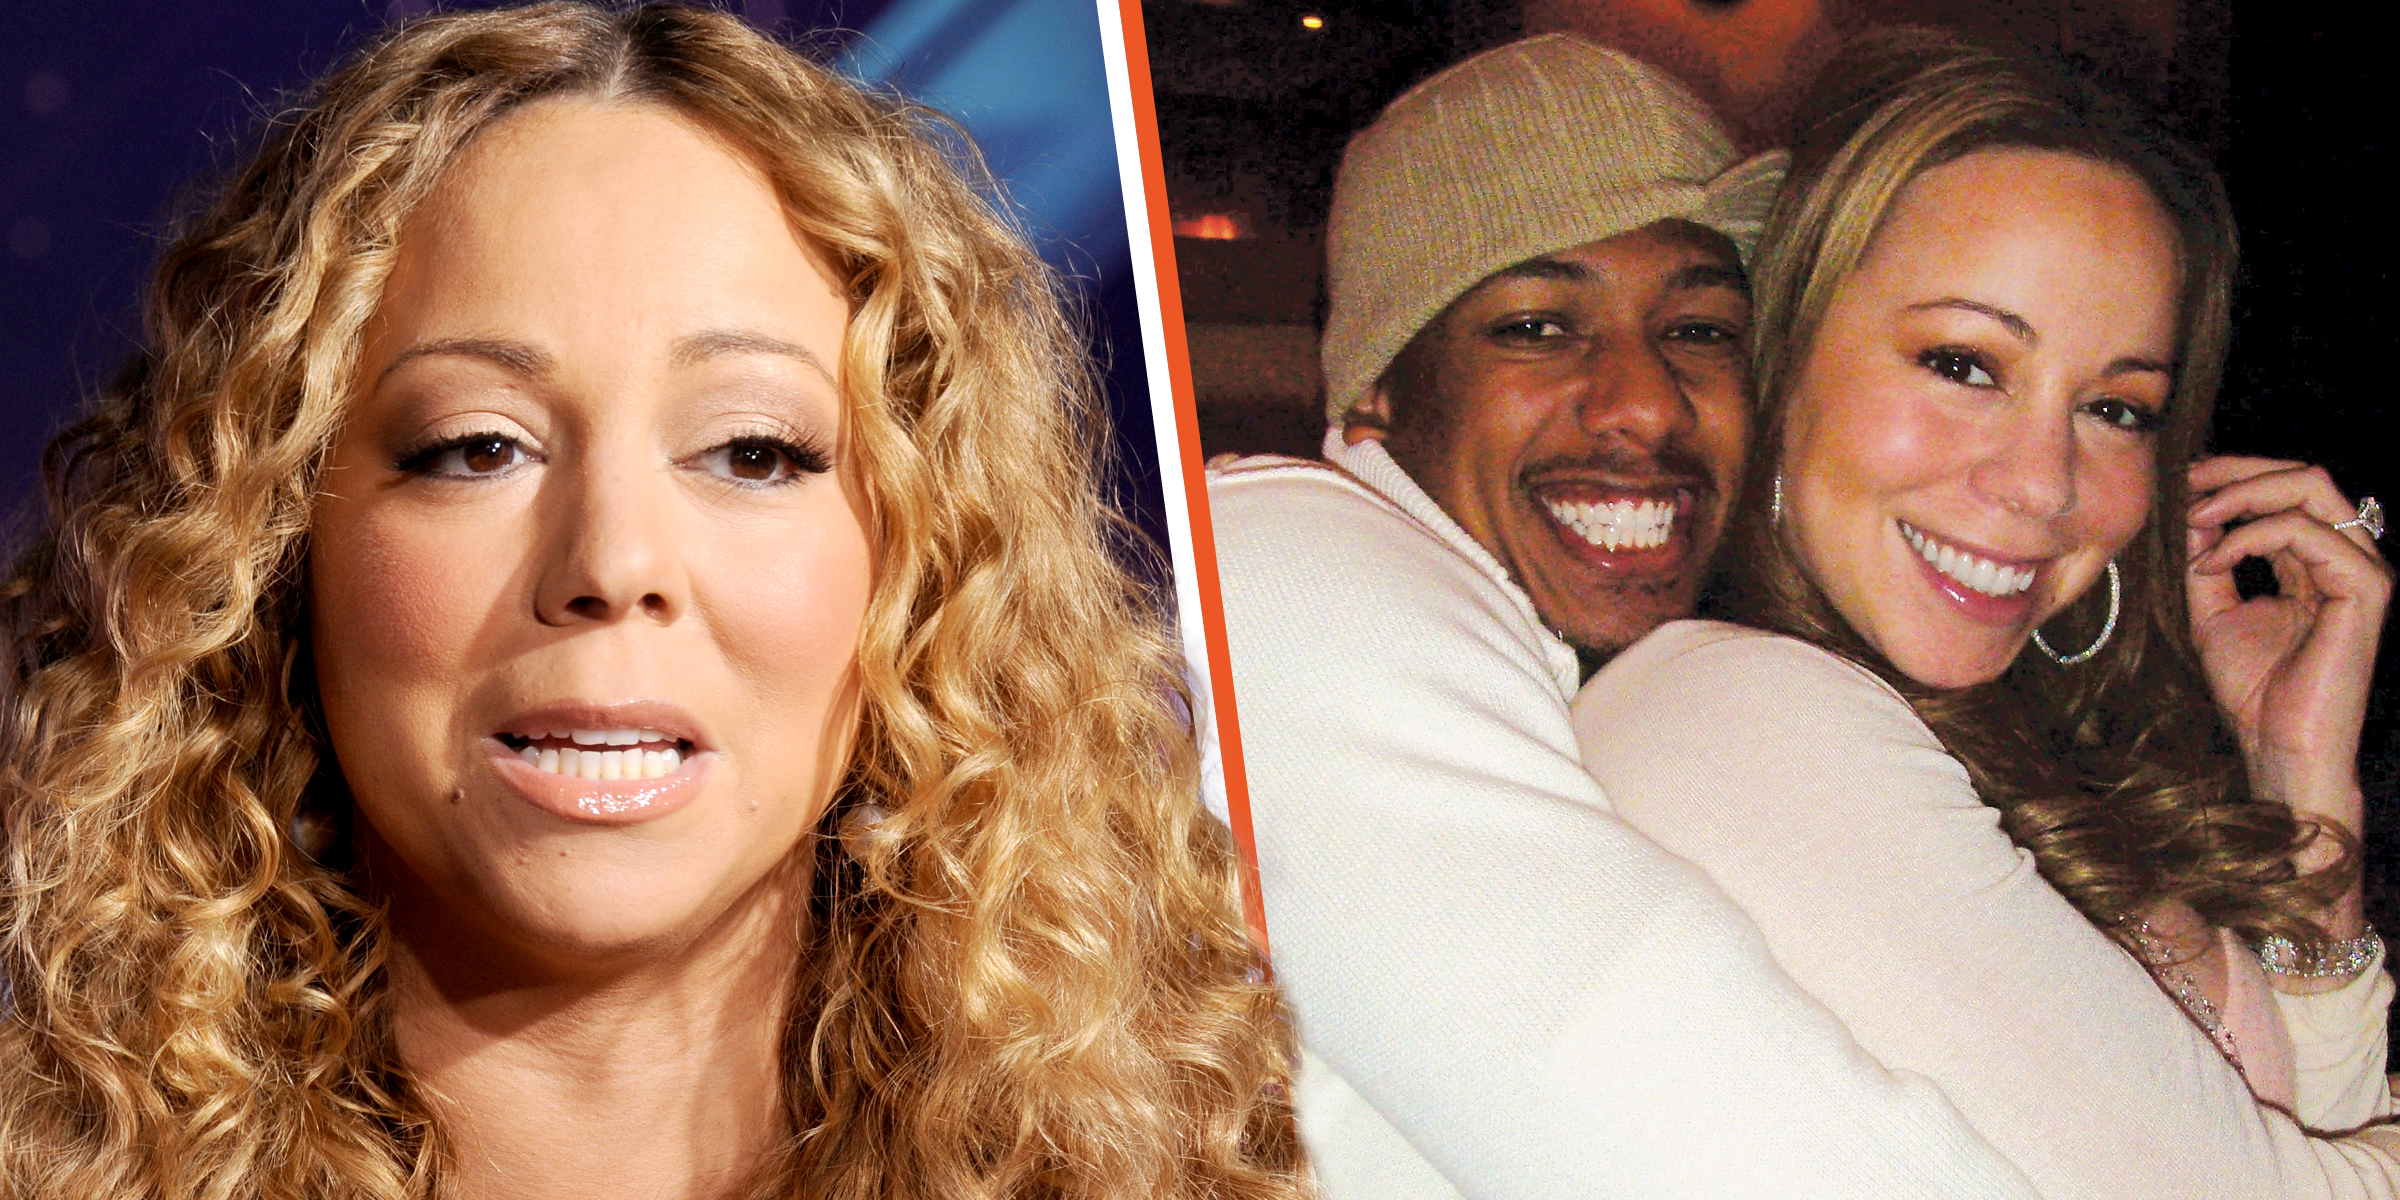 Mariah Carey | Mariah Carey and Nick Cannon | Source: Getty Images